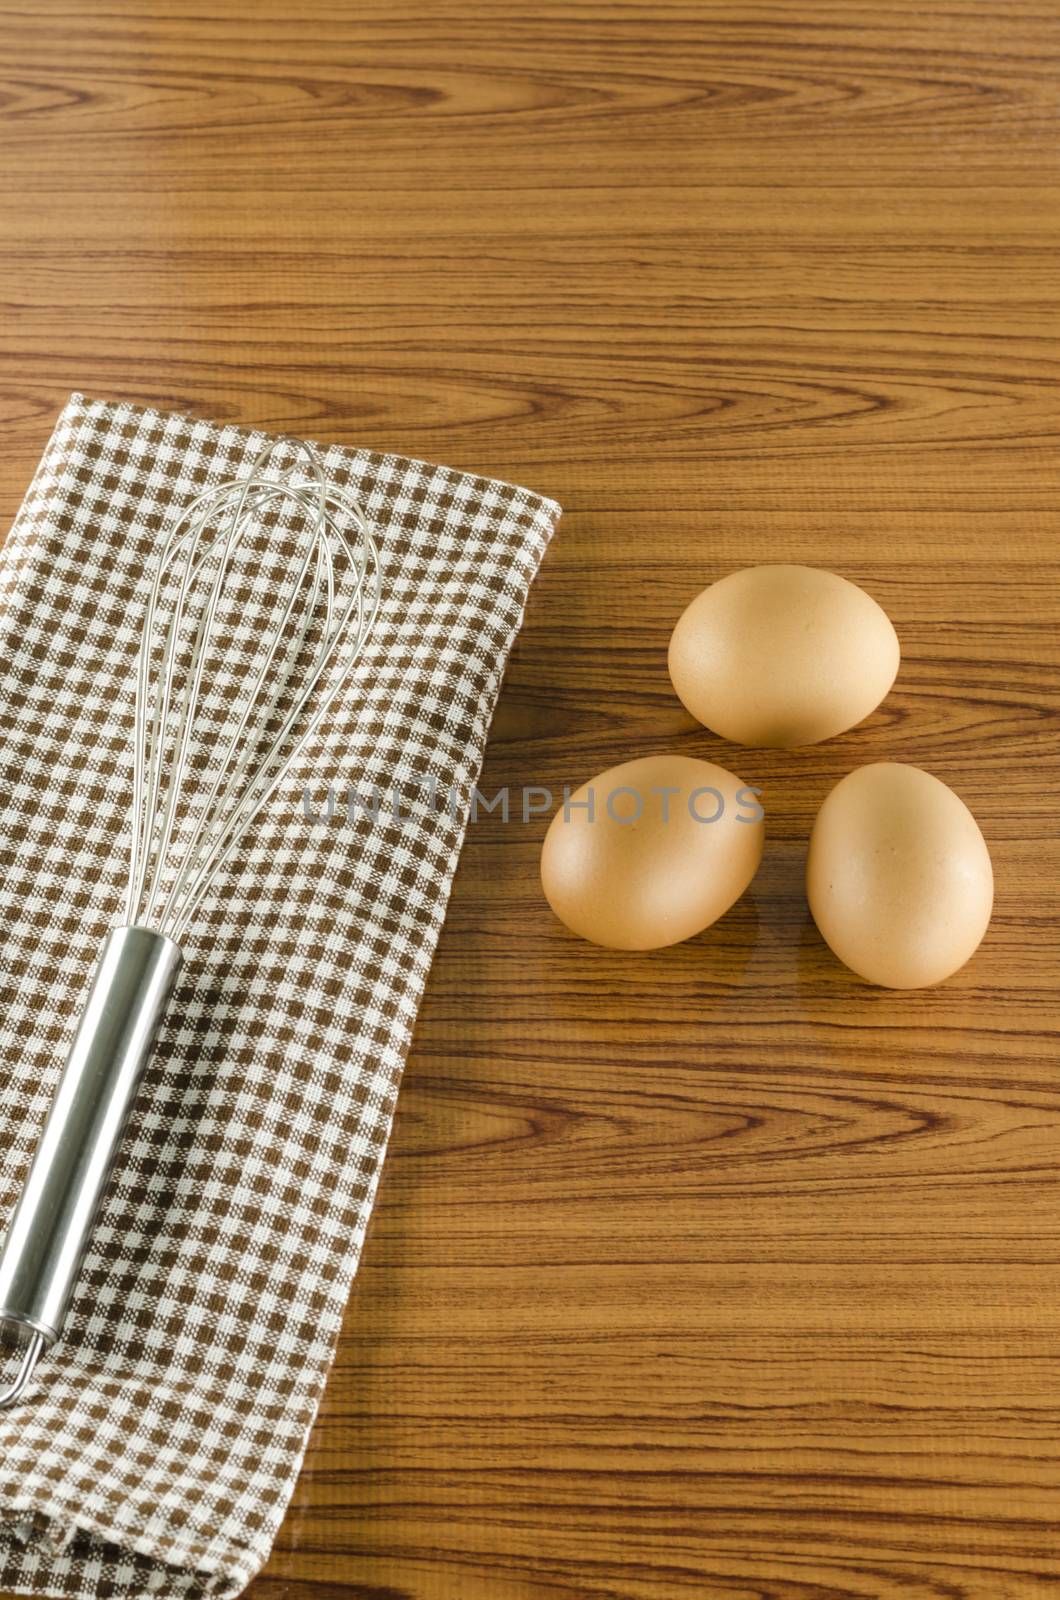 whisk egg and brown kitchen towel by ammza12